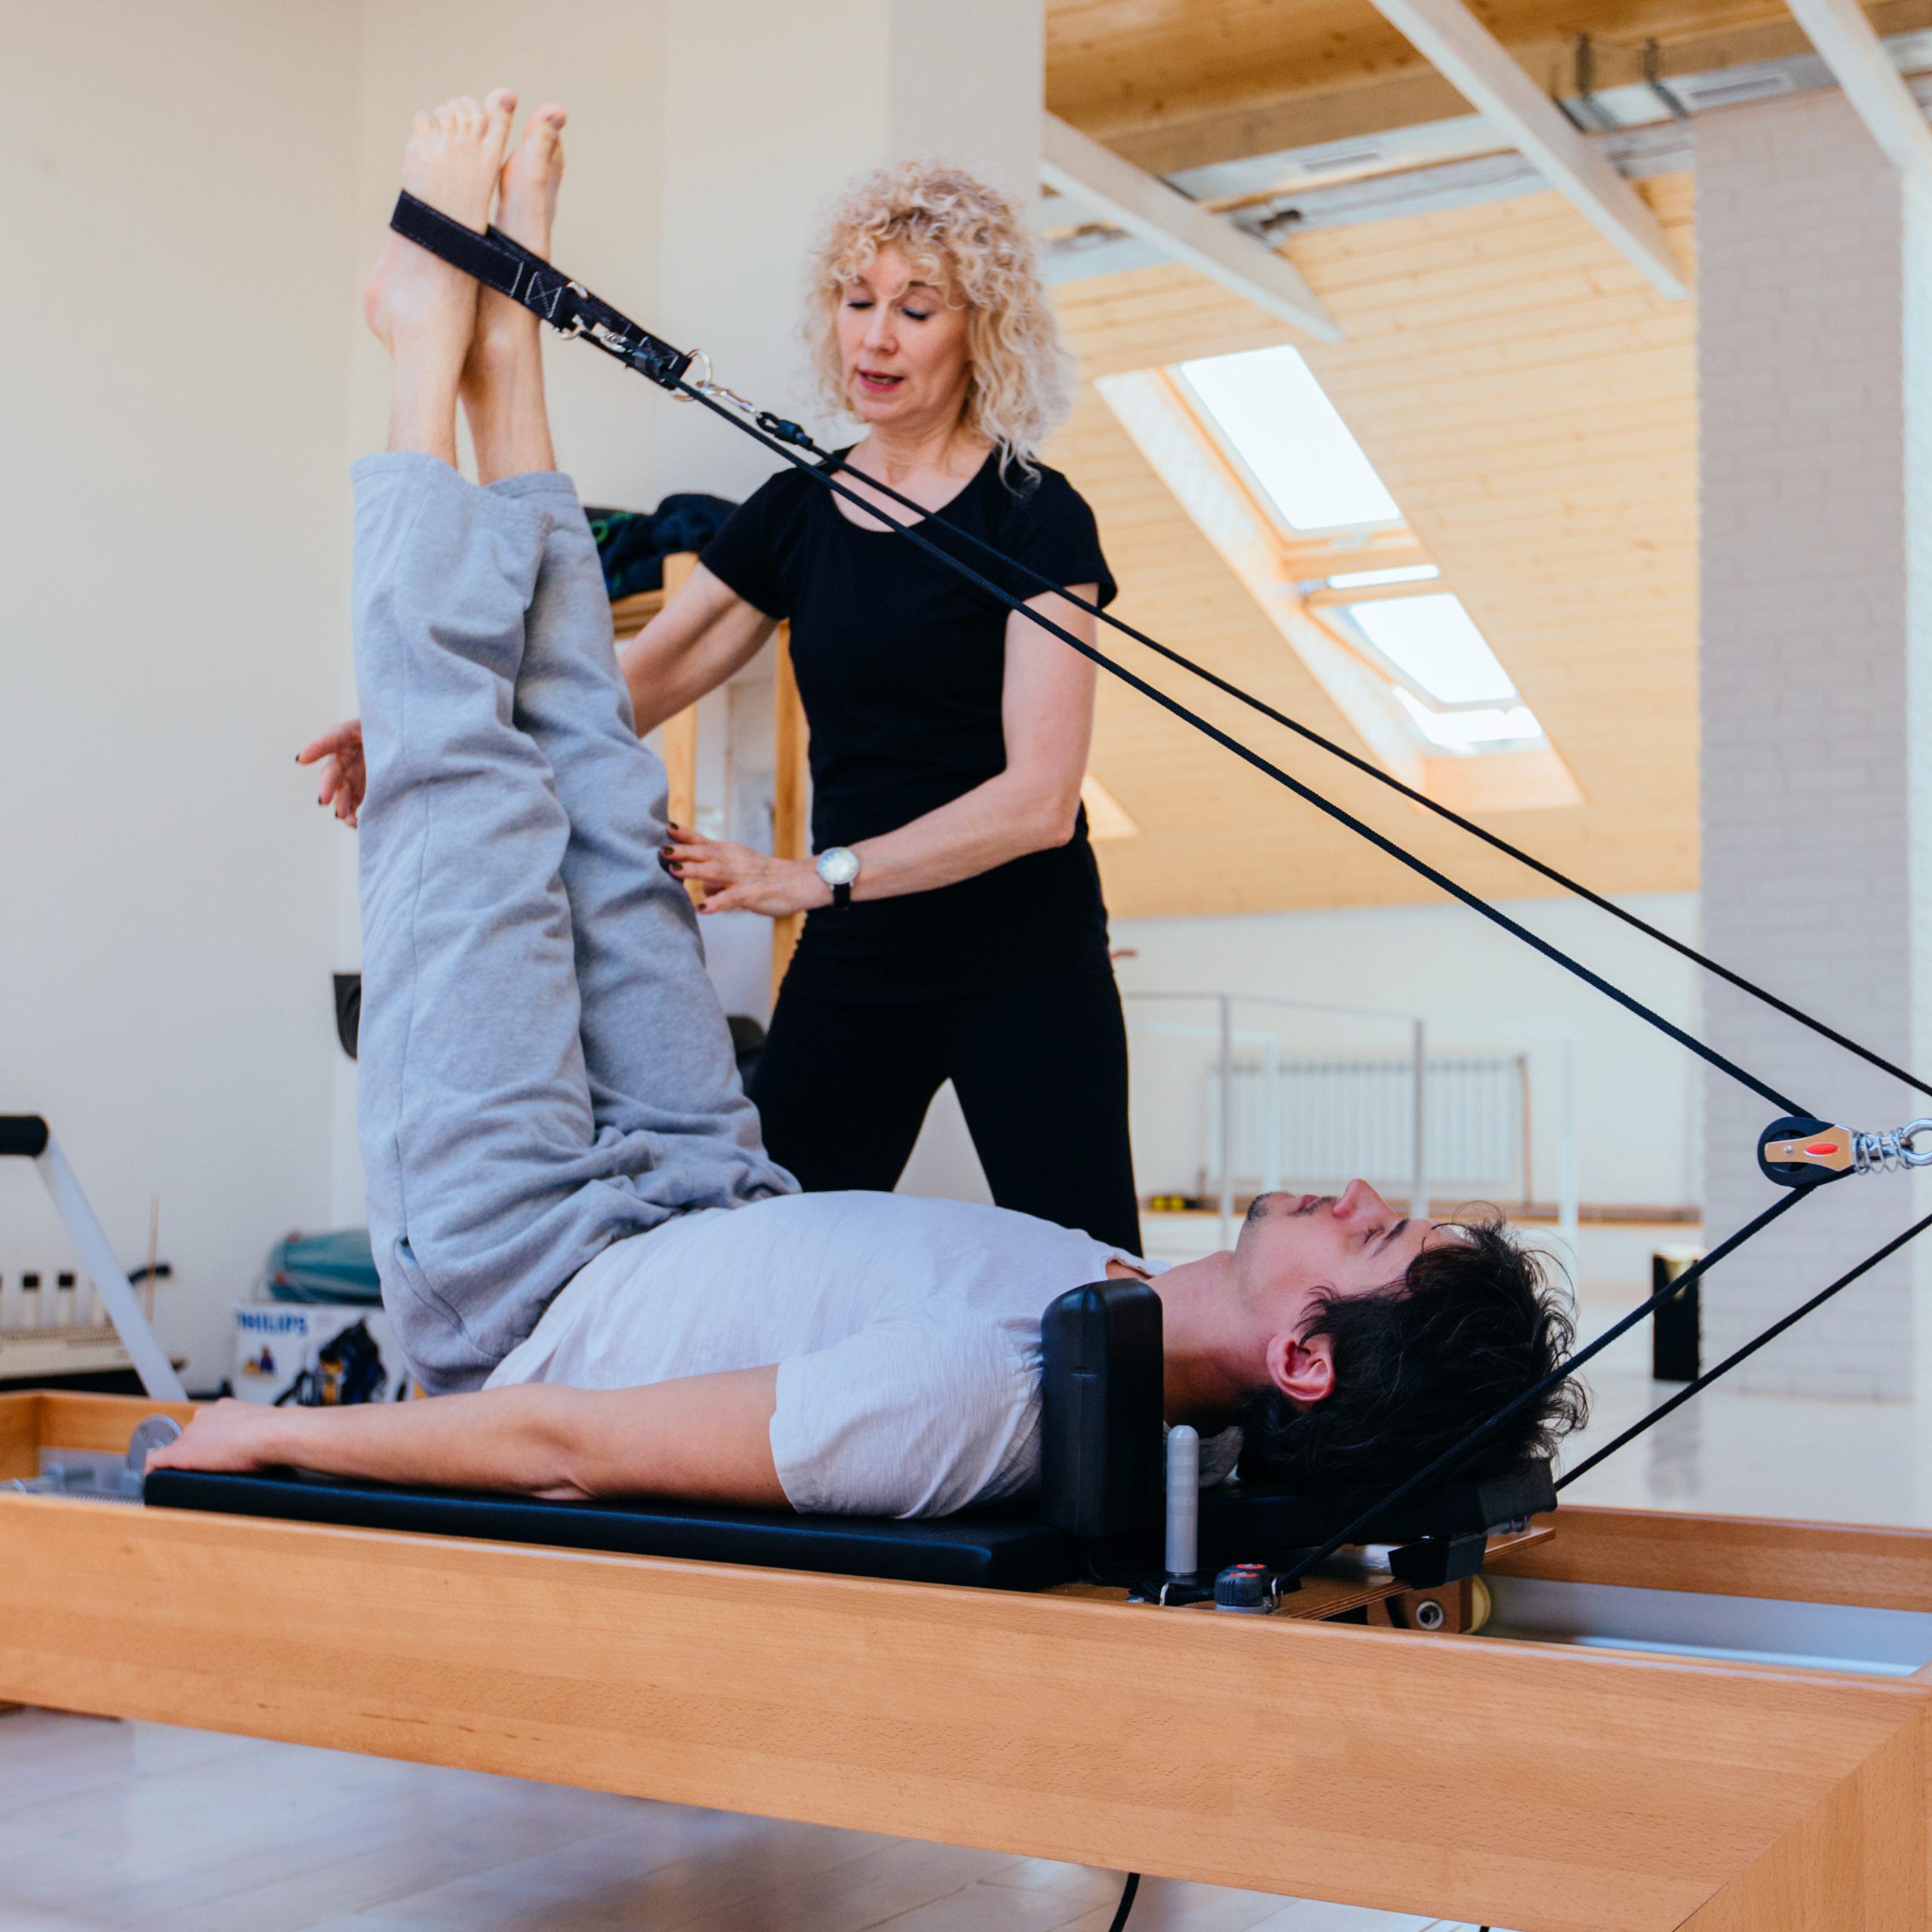 Pilates Based Physical Therapy Services Physical Therapy In Motion Billings Mt